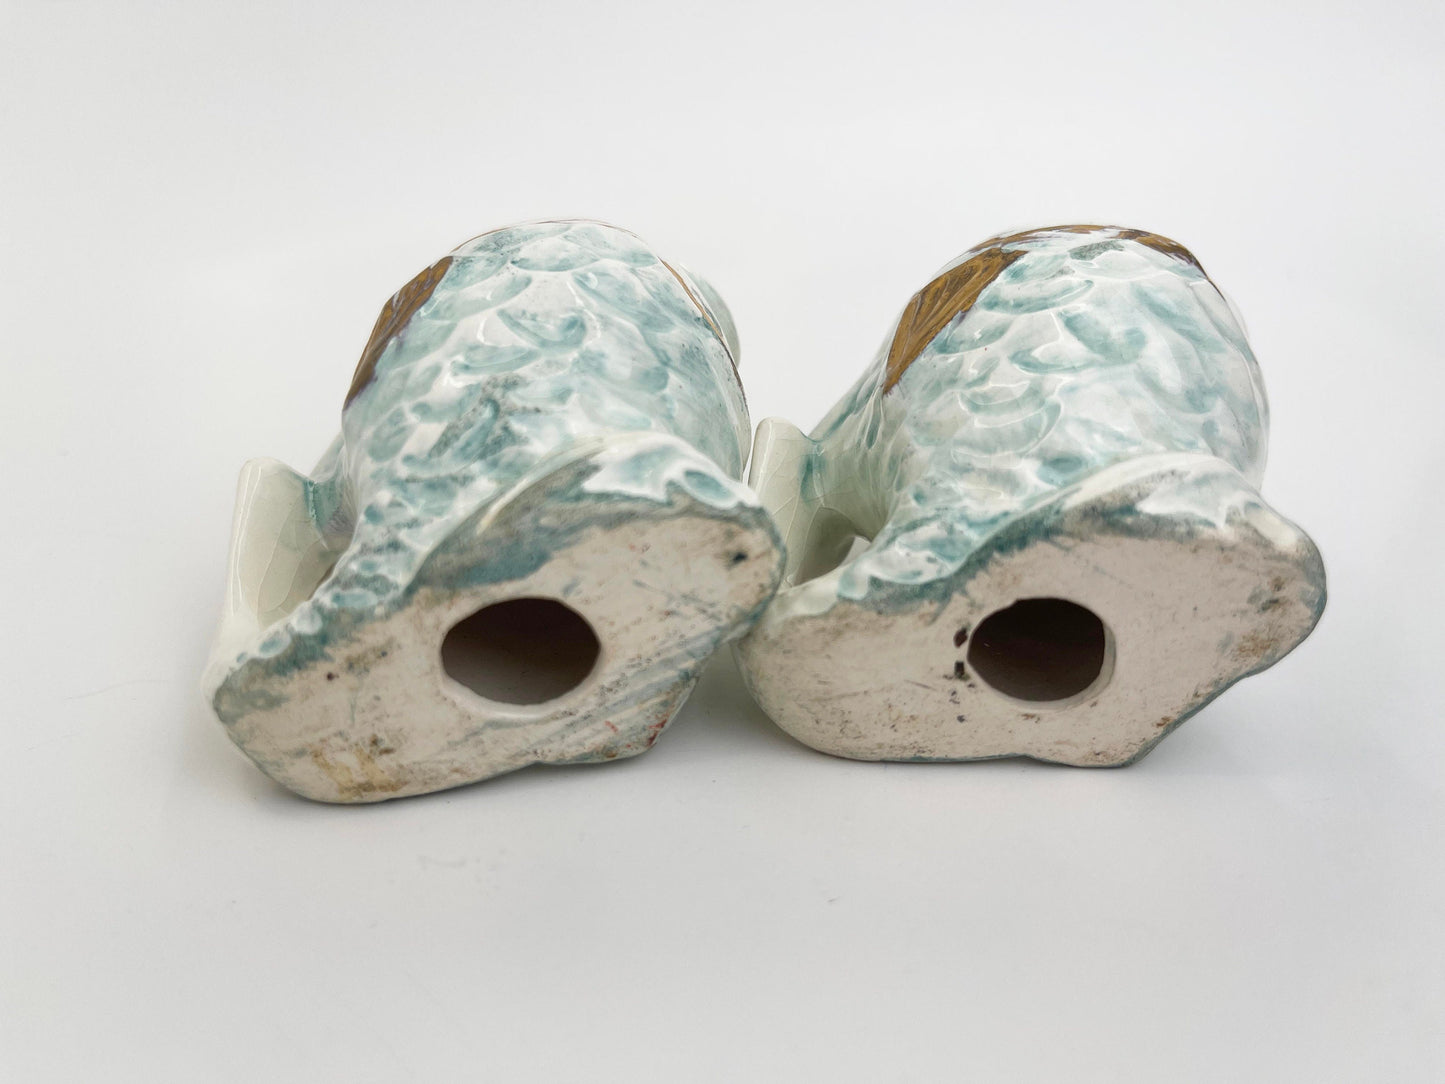 Vintage Fish Salt and Pepper Shakers | Mid Century | Hand Painted Ceramic | Gold, Blue, Beige